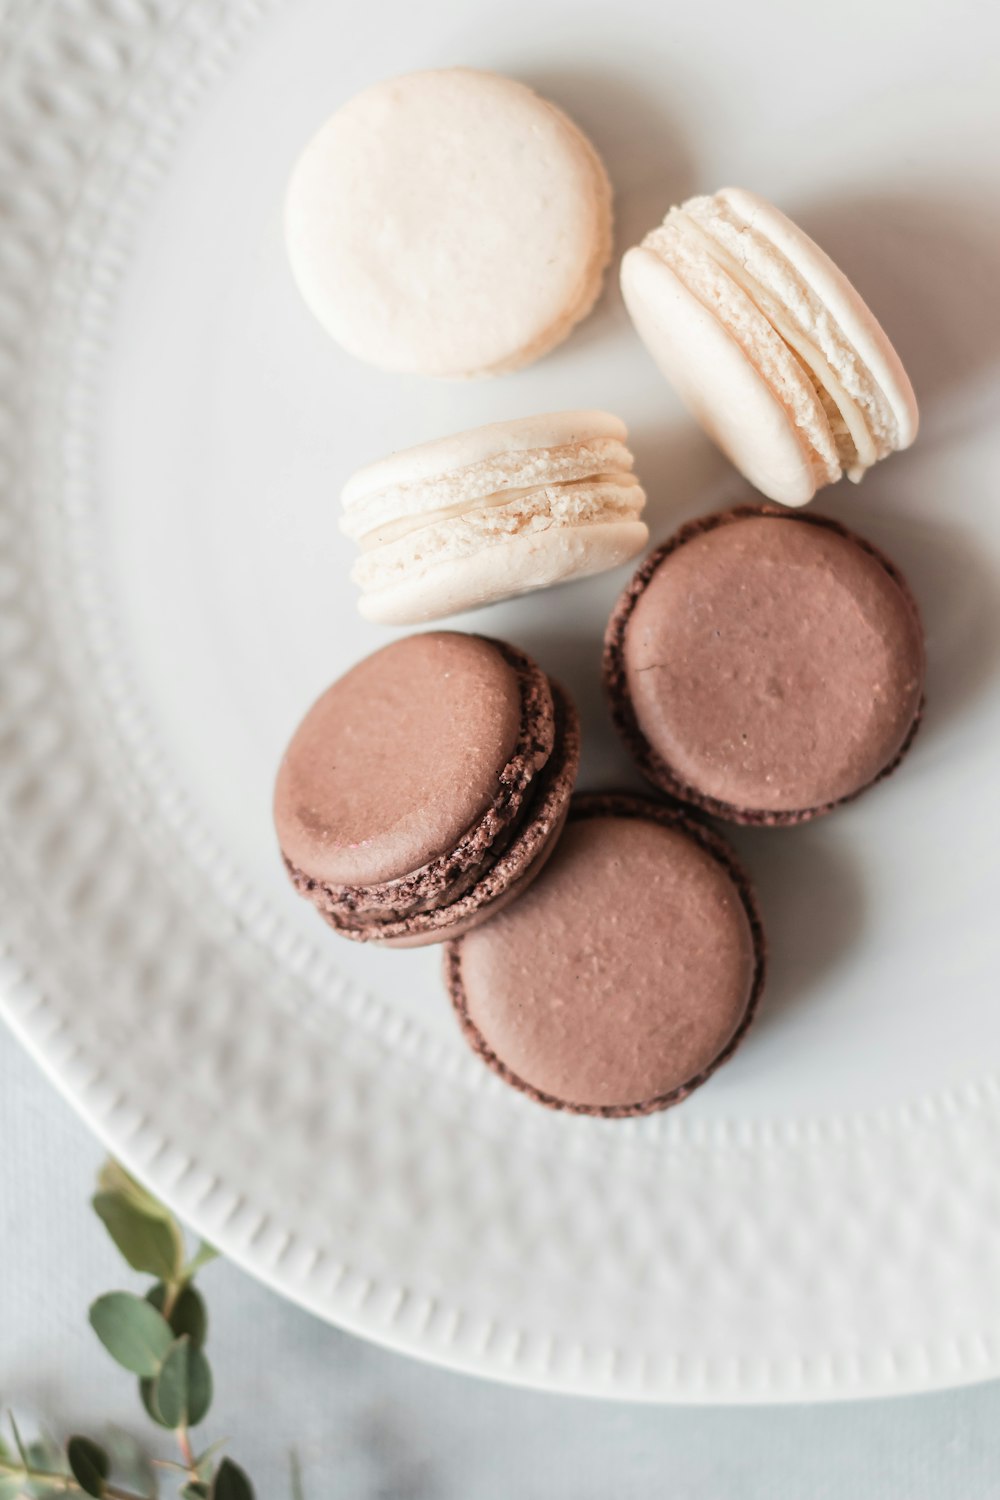 brown round cookies on white ceramic plate